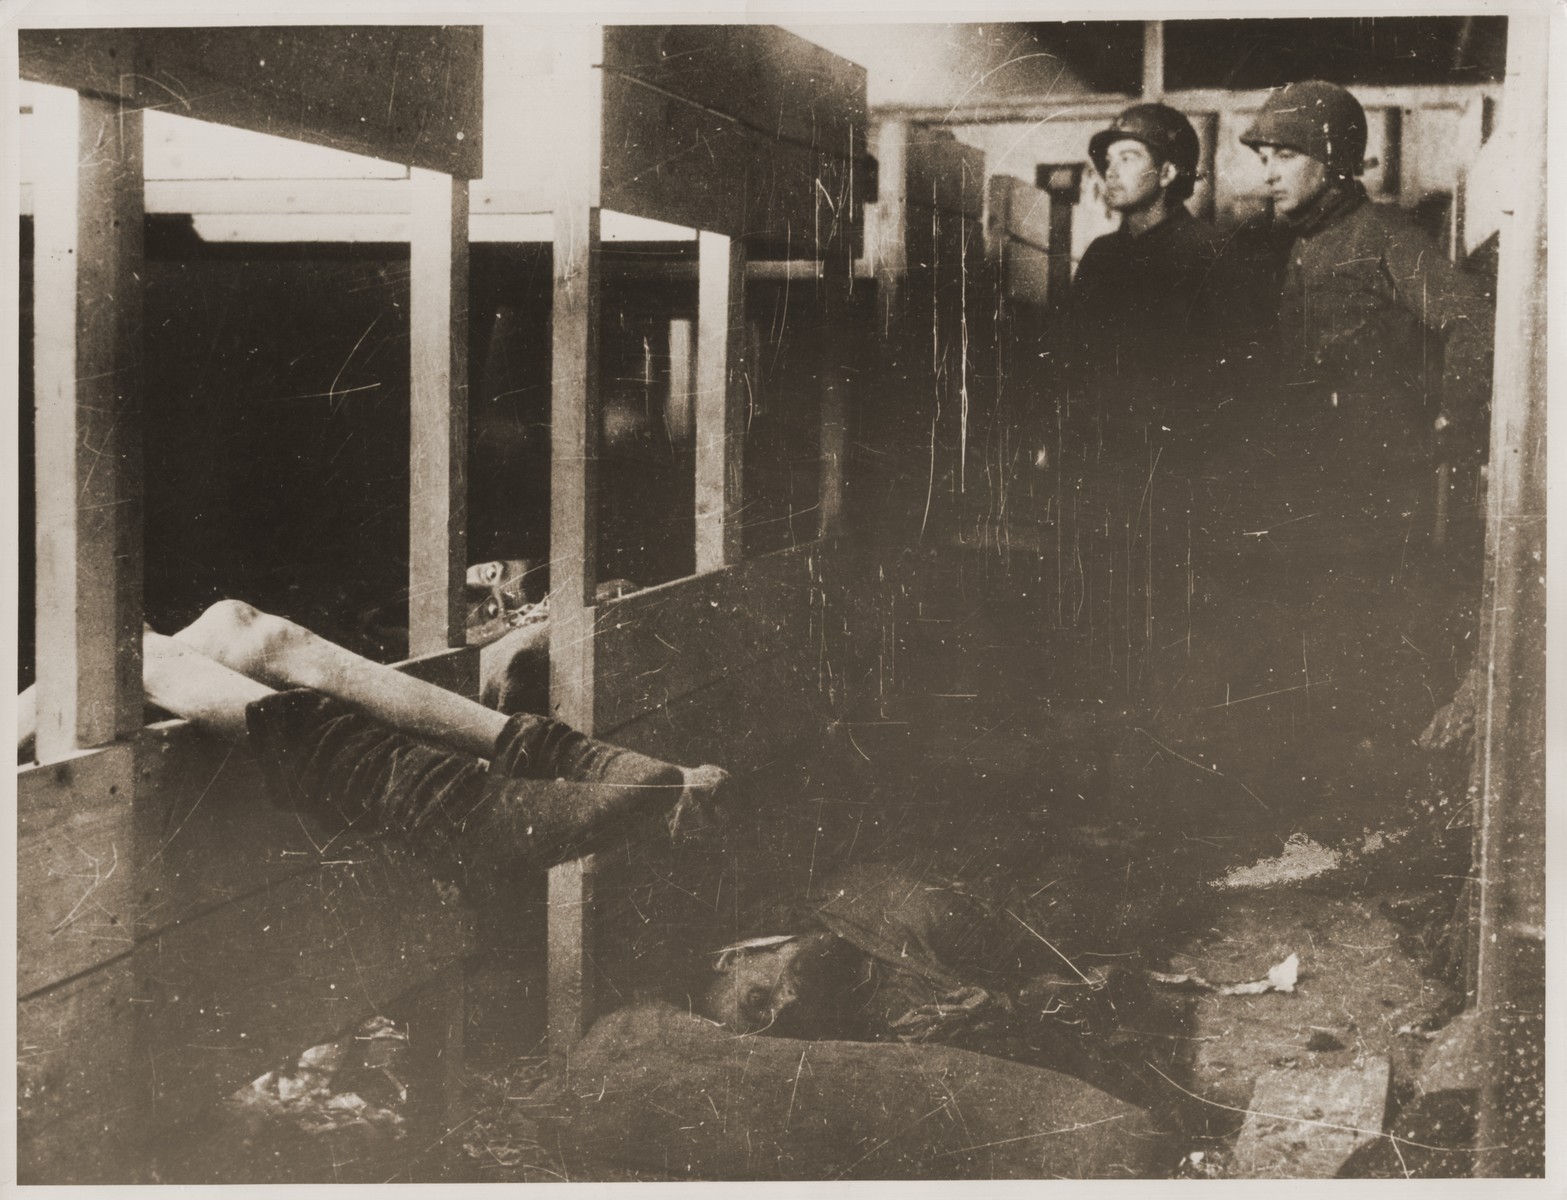 American troops inspect a barracks in Dora-Mittelbau soon after the liberation.  Two survivors lie in bunks, while corpses lie on the floor.